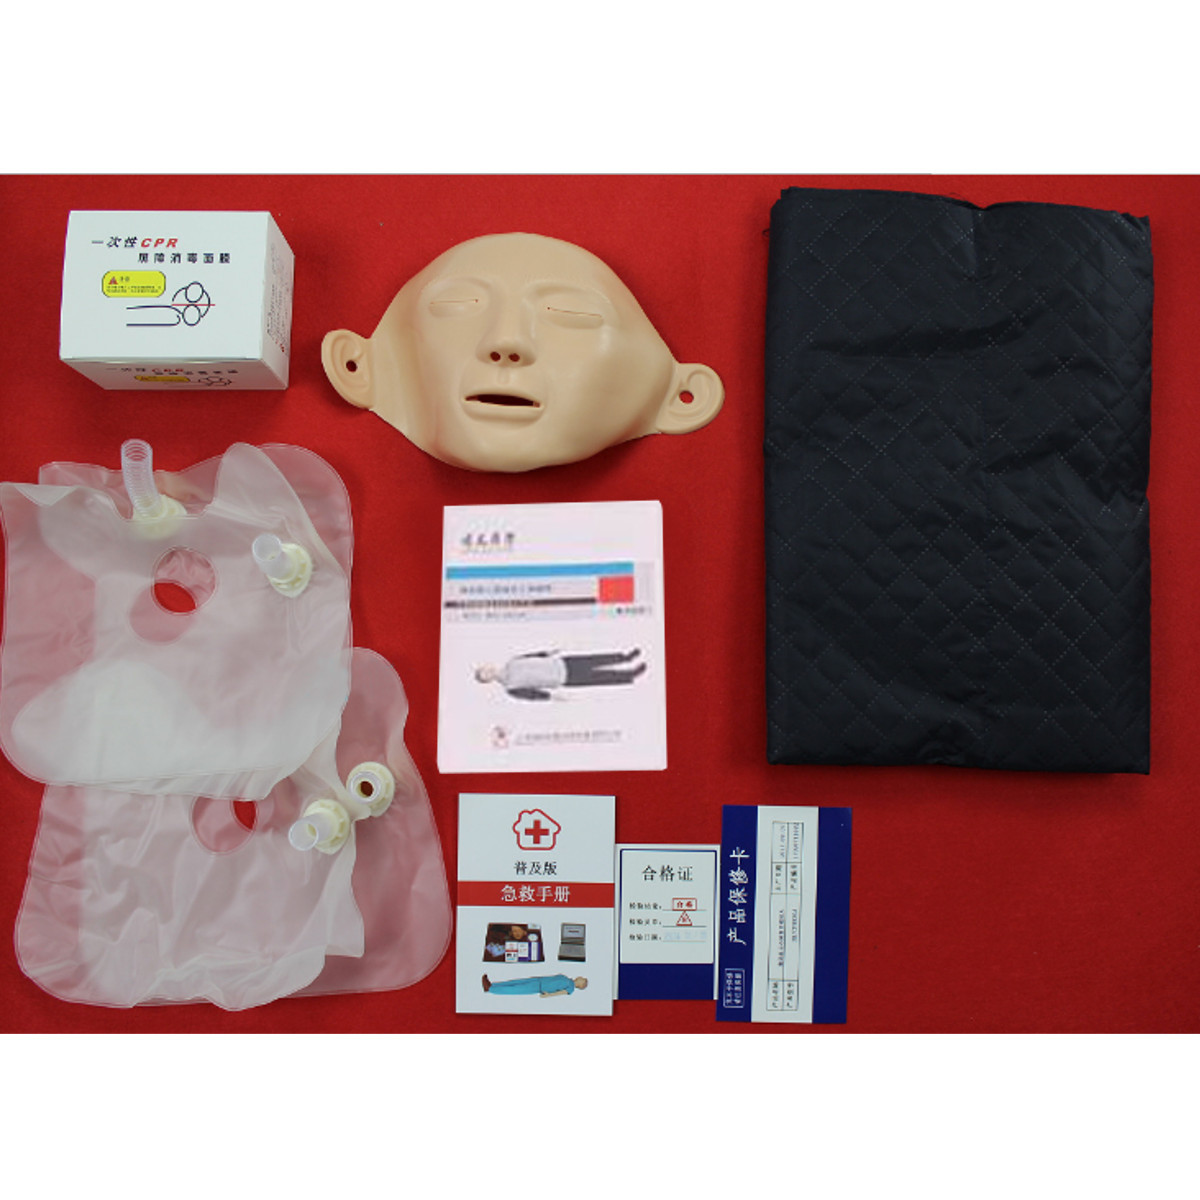 CPR Adult Manikin AED First Aid Training Dummy Training Medical Model Respiration Human 15